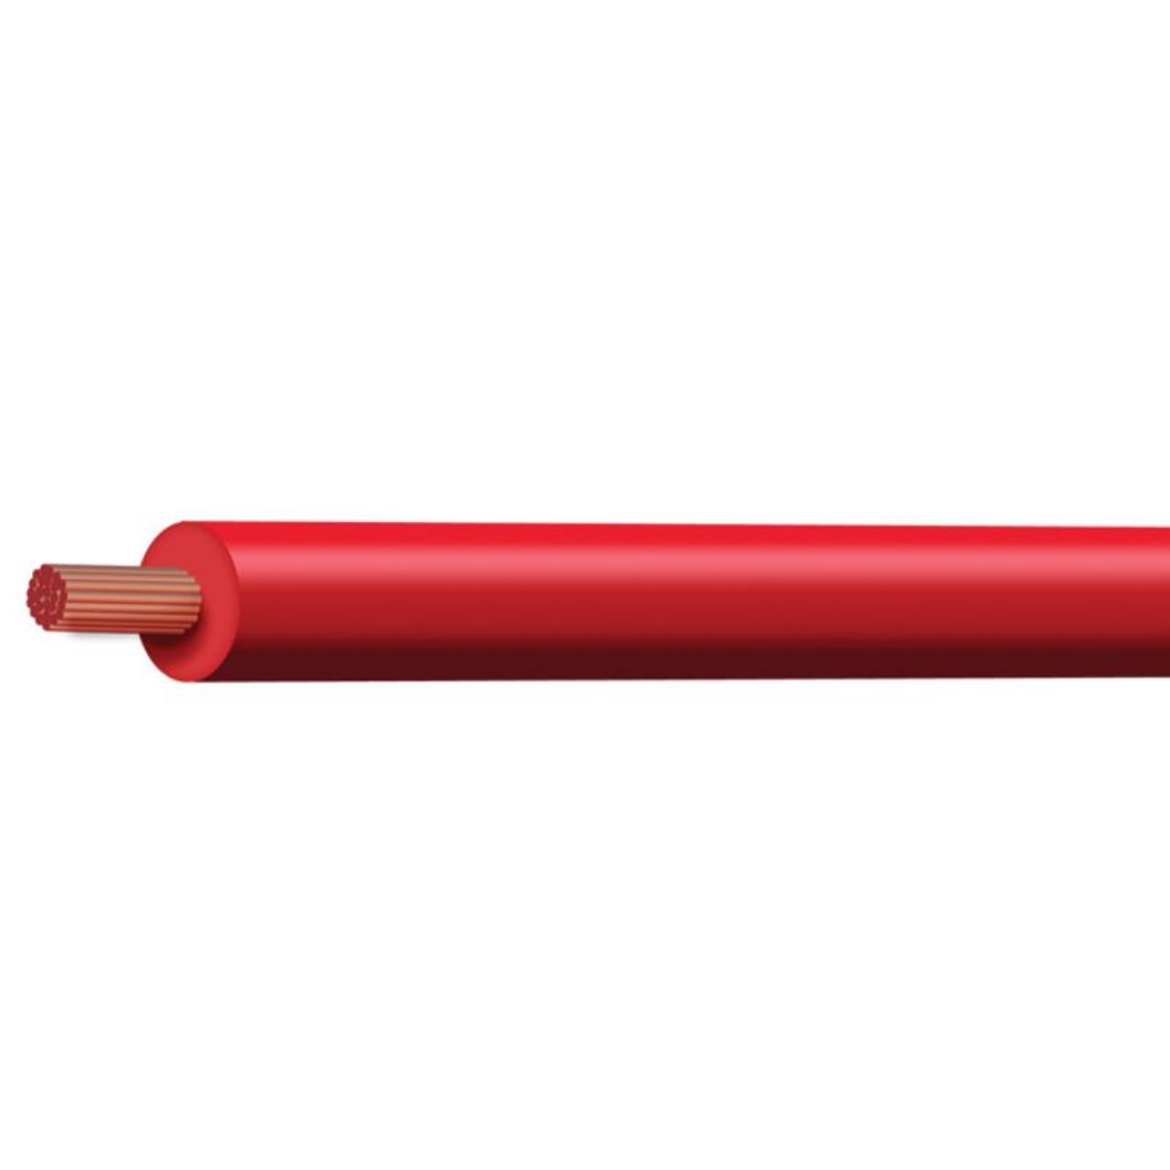 Picture of TYCAB SINGLE CORE CABLE BATTERY 0 B&S CROSS SECT 49.2MM SQ RATING 315A RED - 30M ROLL